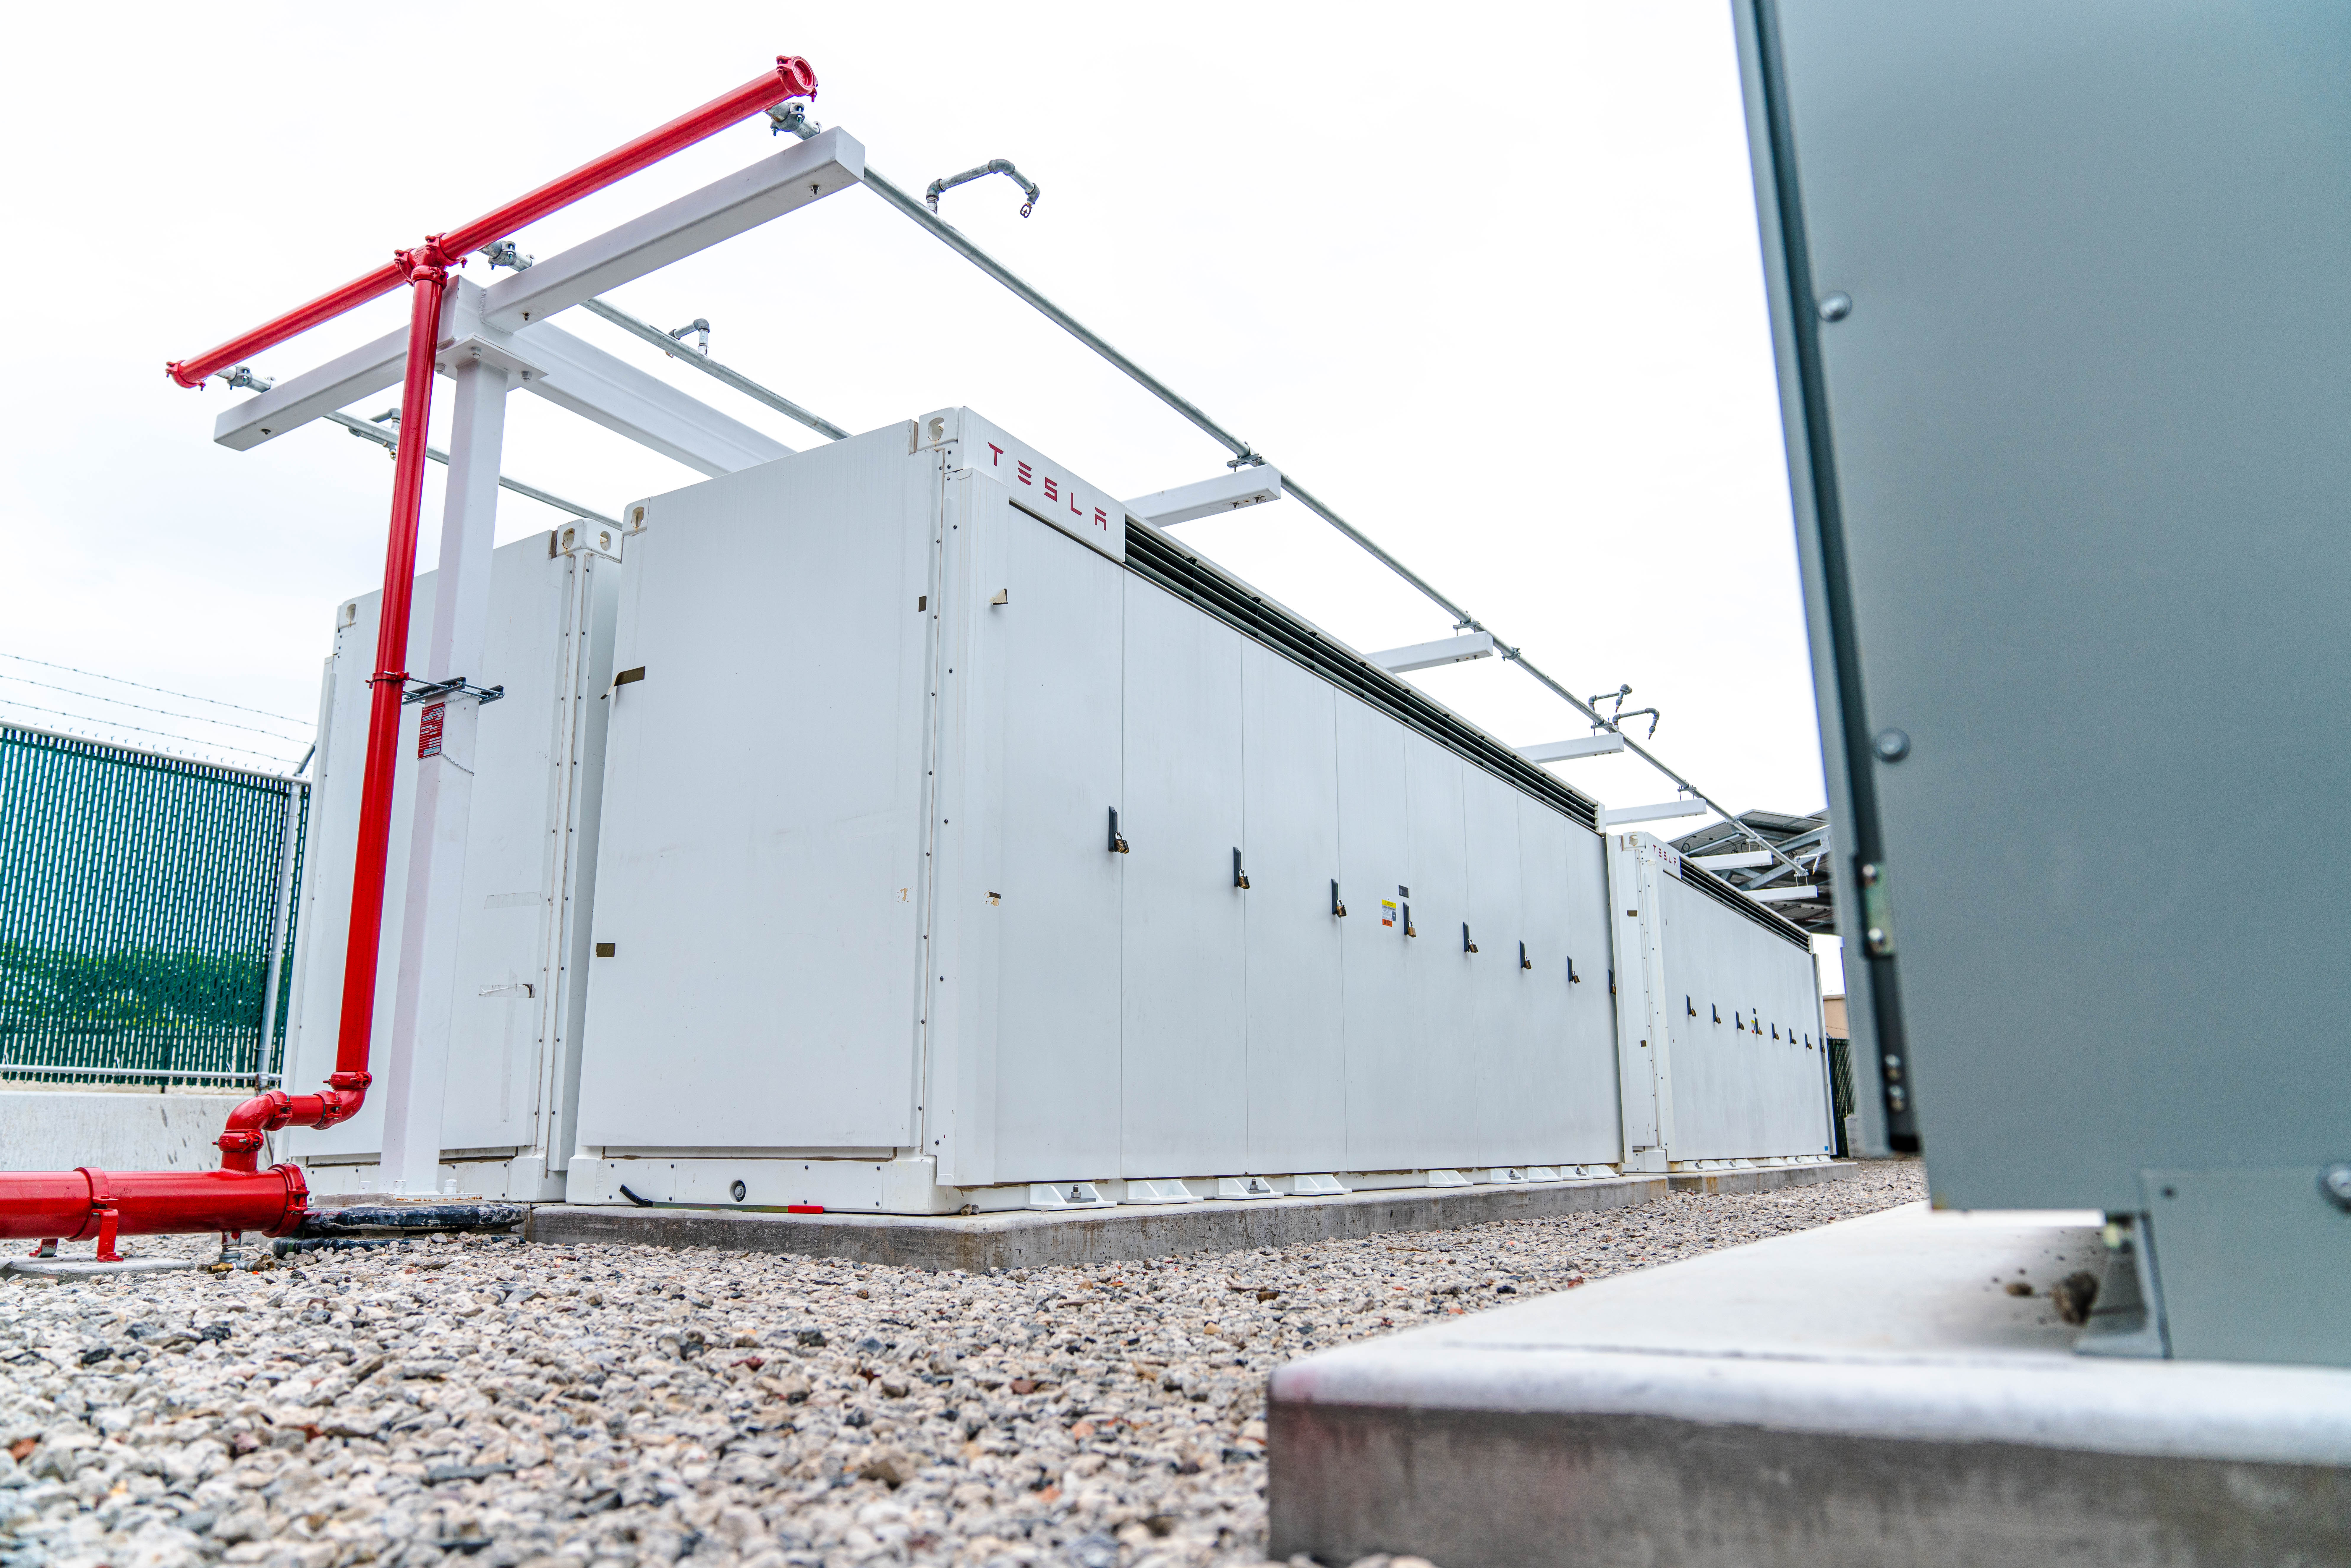 How NineDot is fitting big battery storage into the Big Apple